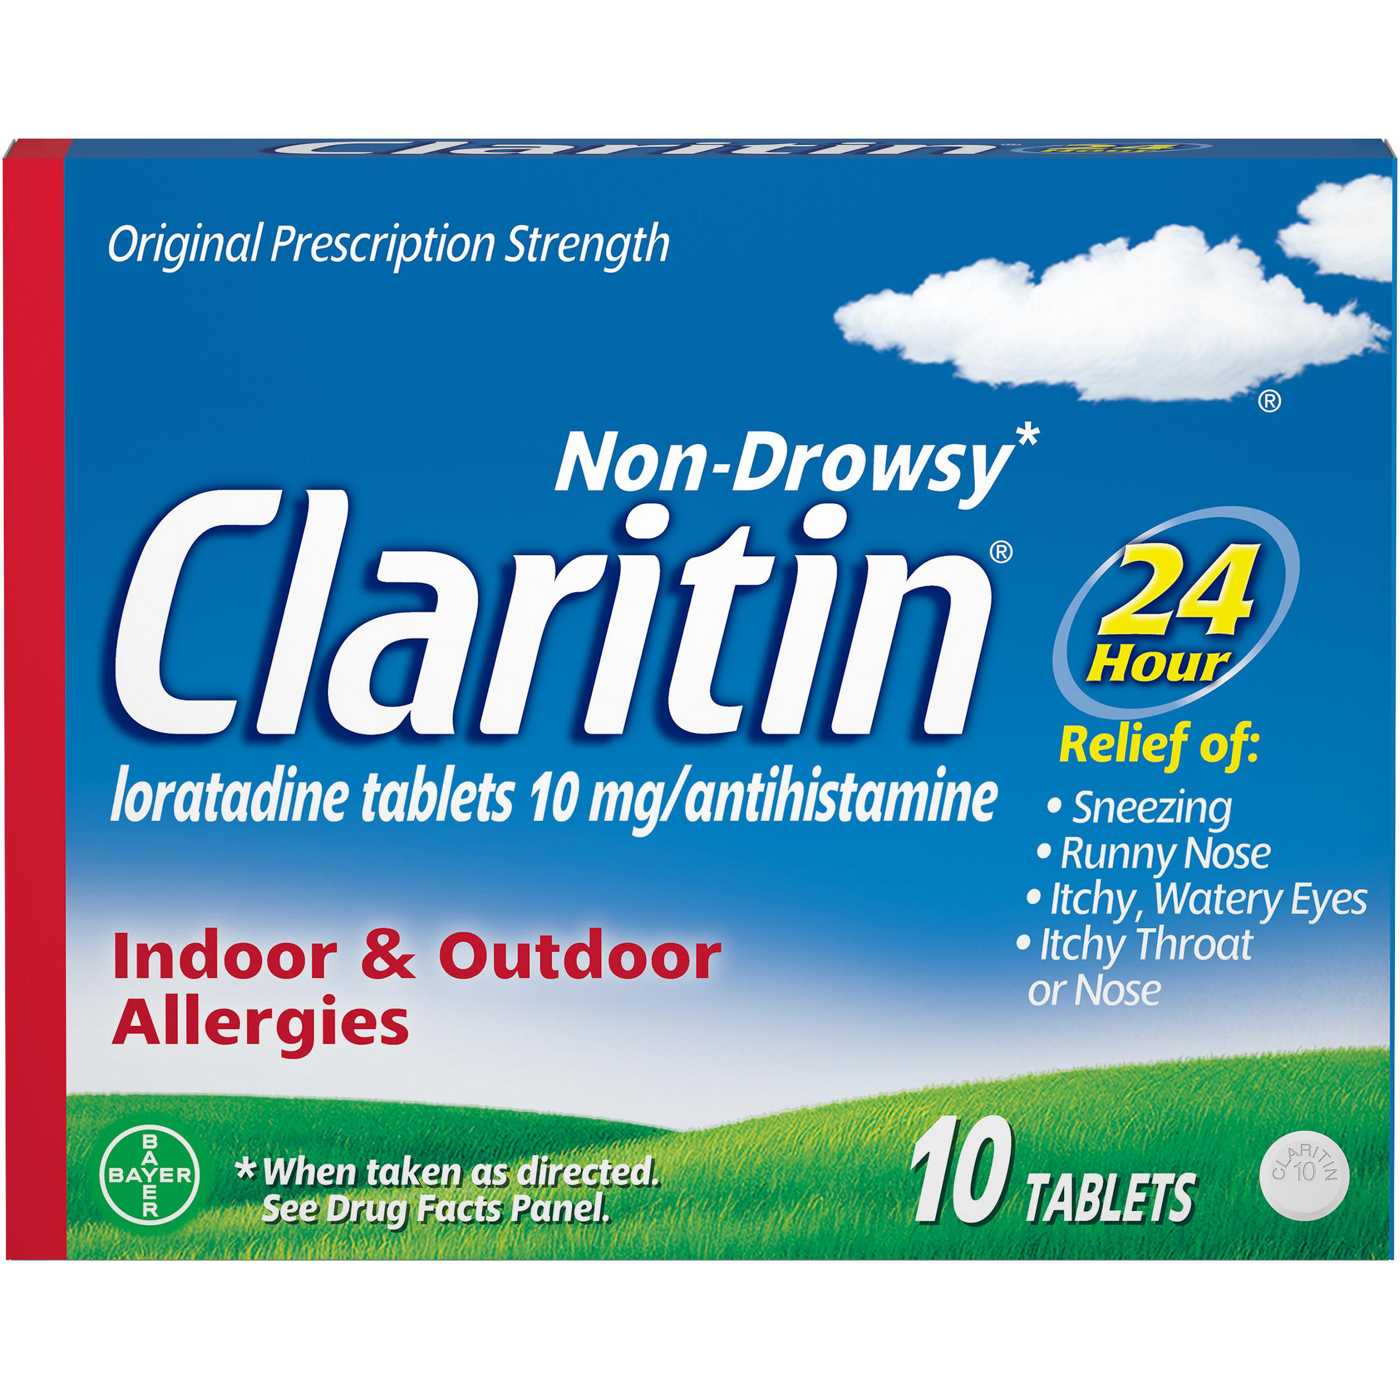 Claritin Non-Drowsy 24 Hour Allergy Relief Tablets; image 1 of 2